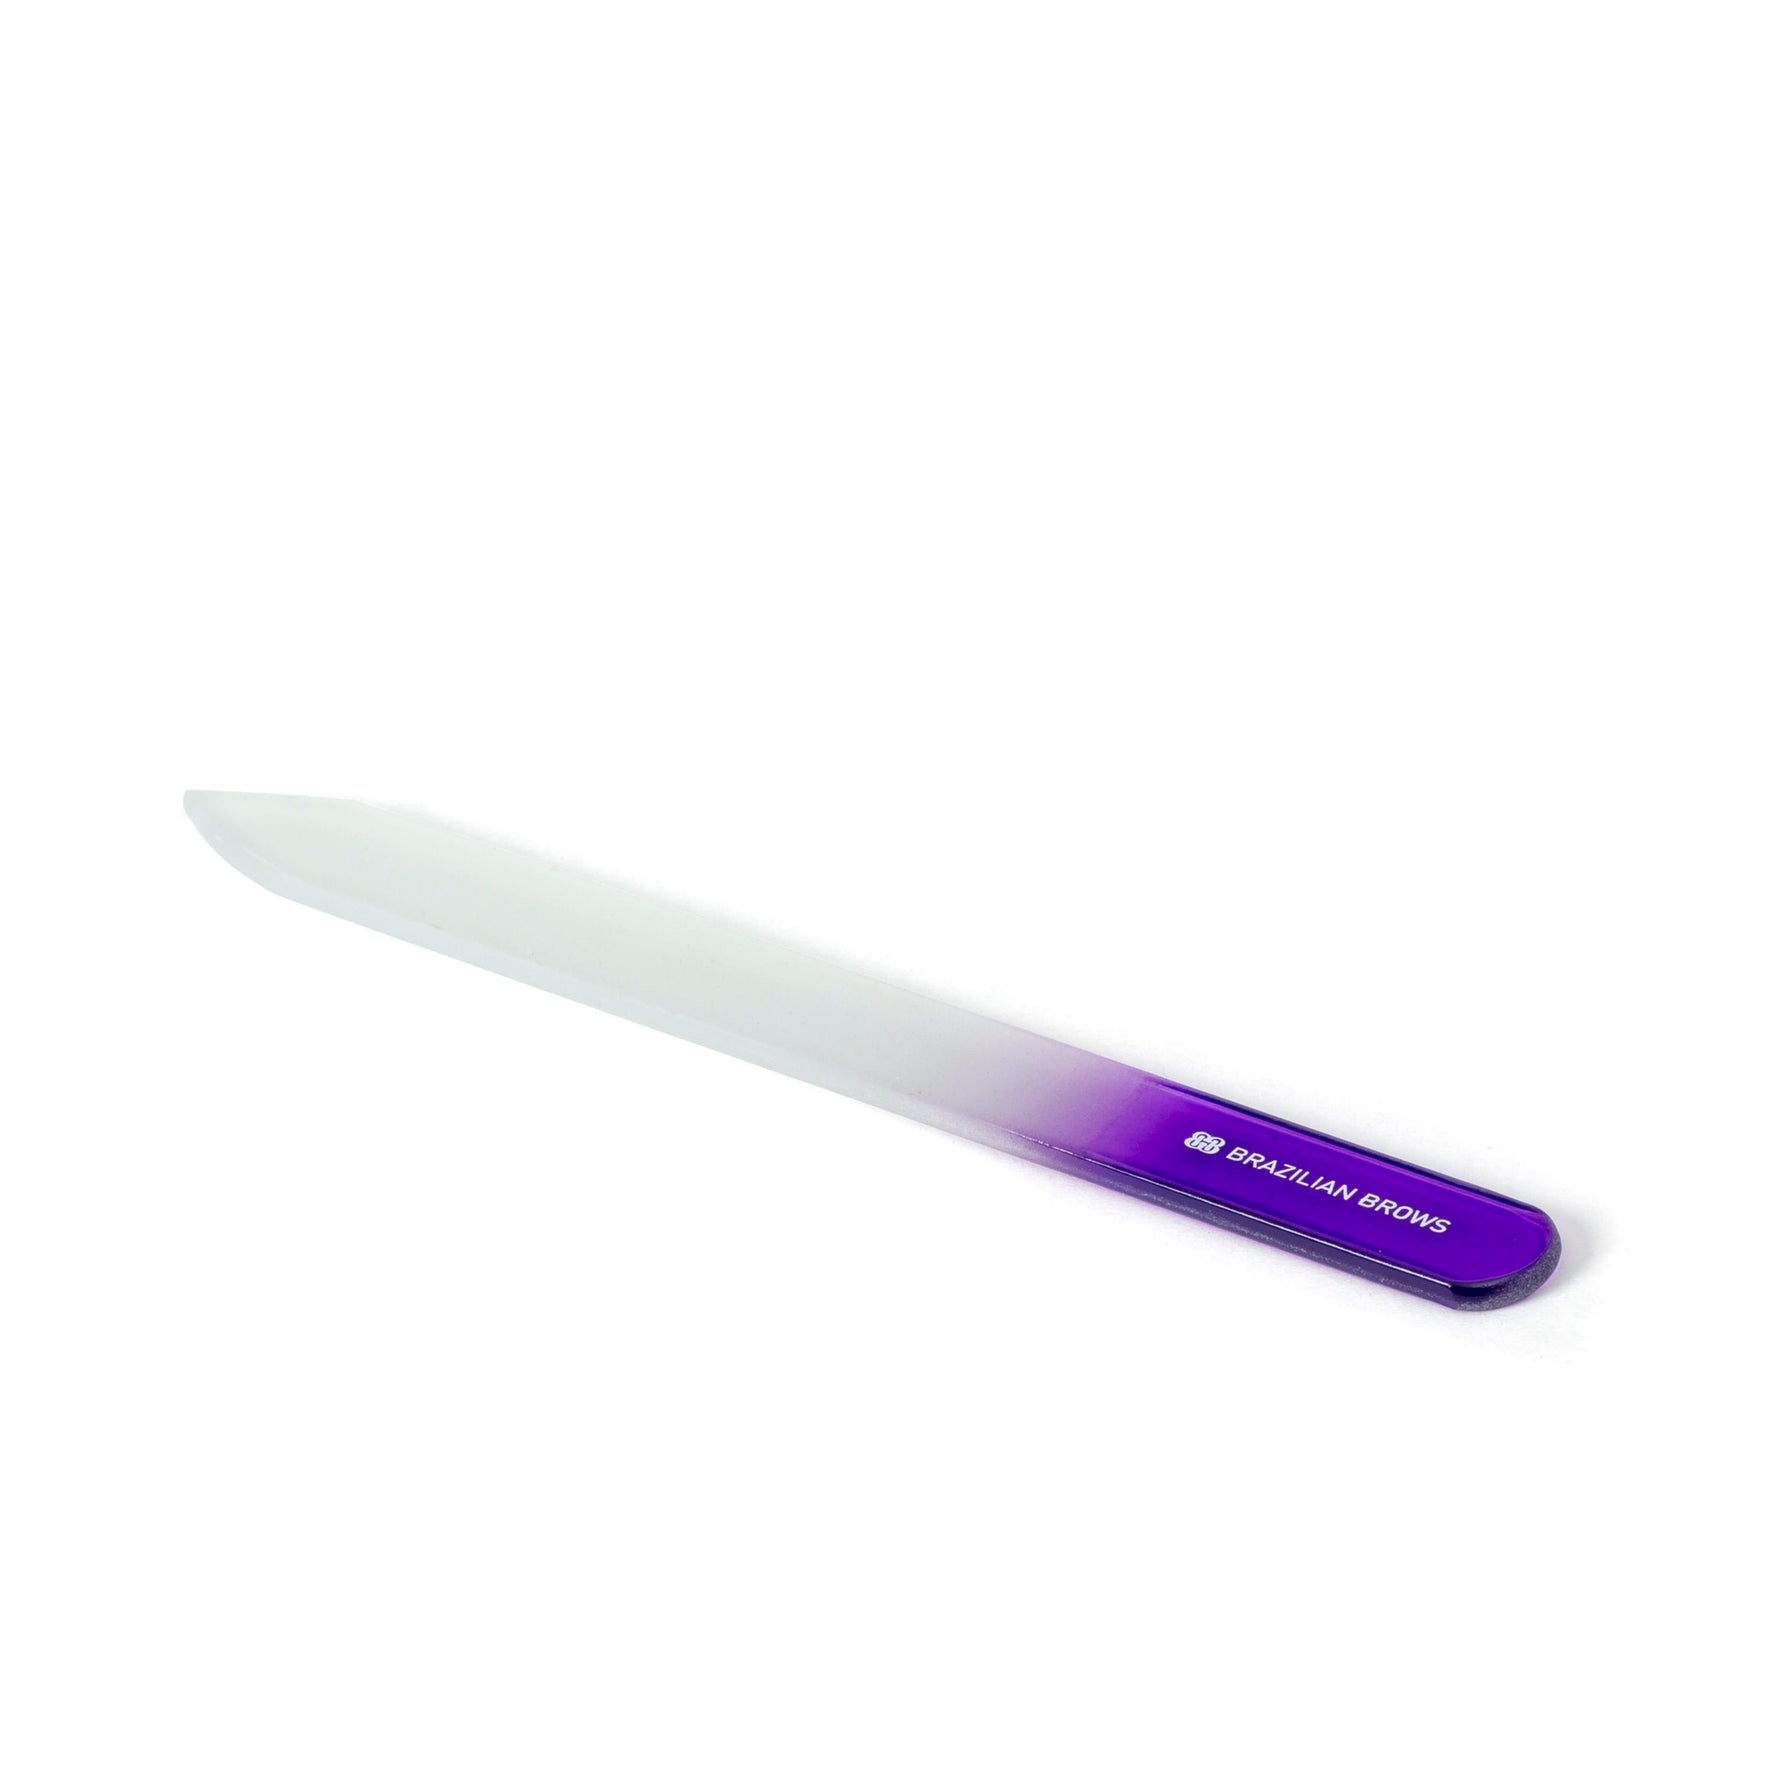 Glass nail file - Point